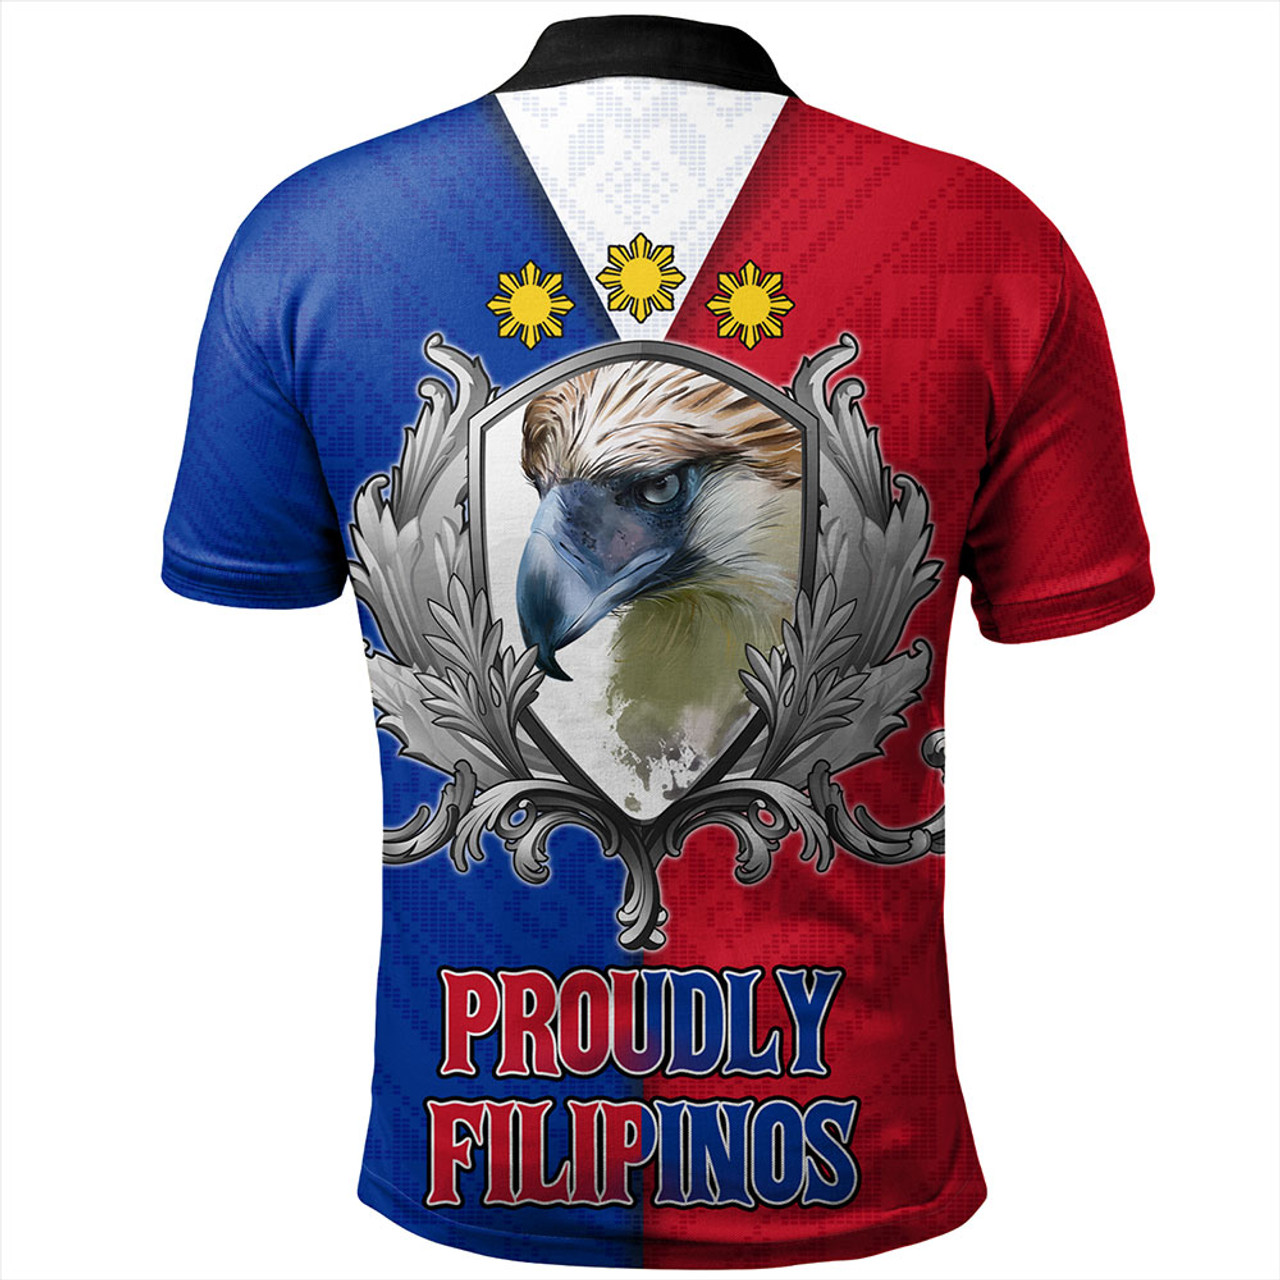 Philippines Filipinos Polo Shirt The Philippine Eagle With Traditional Patterns